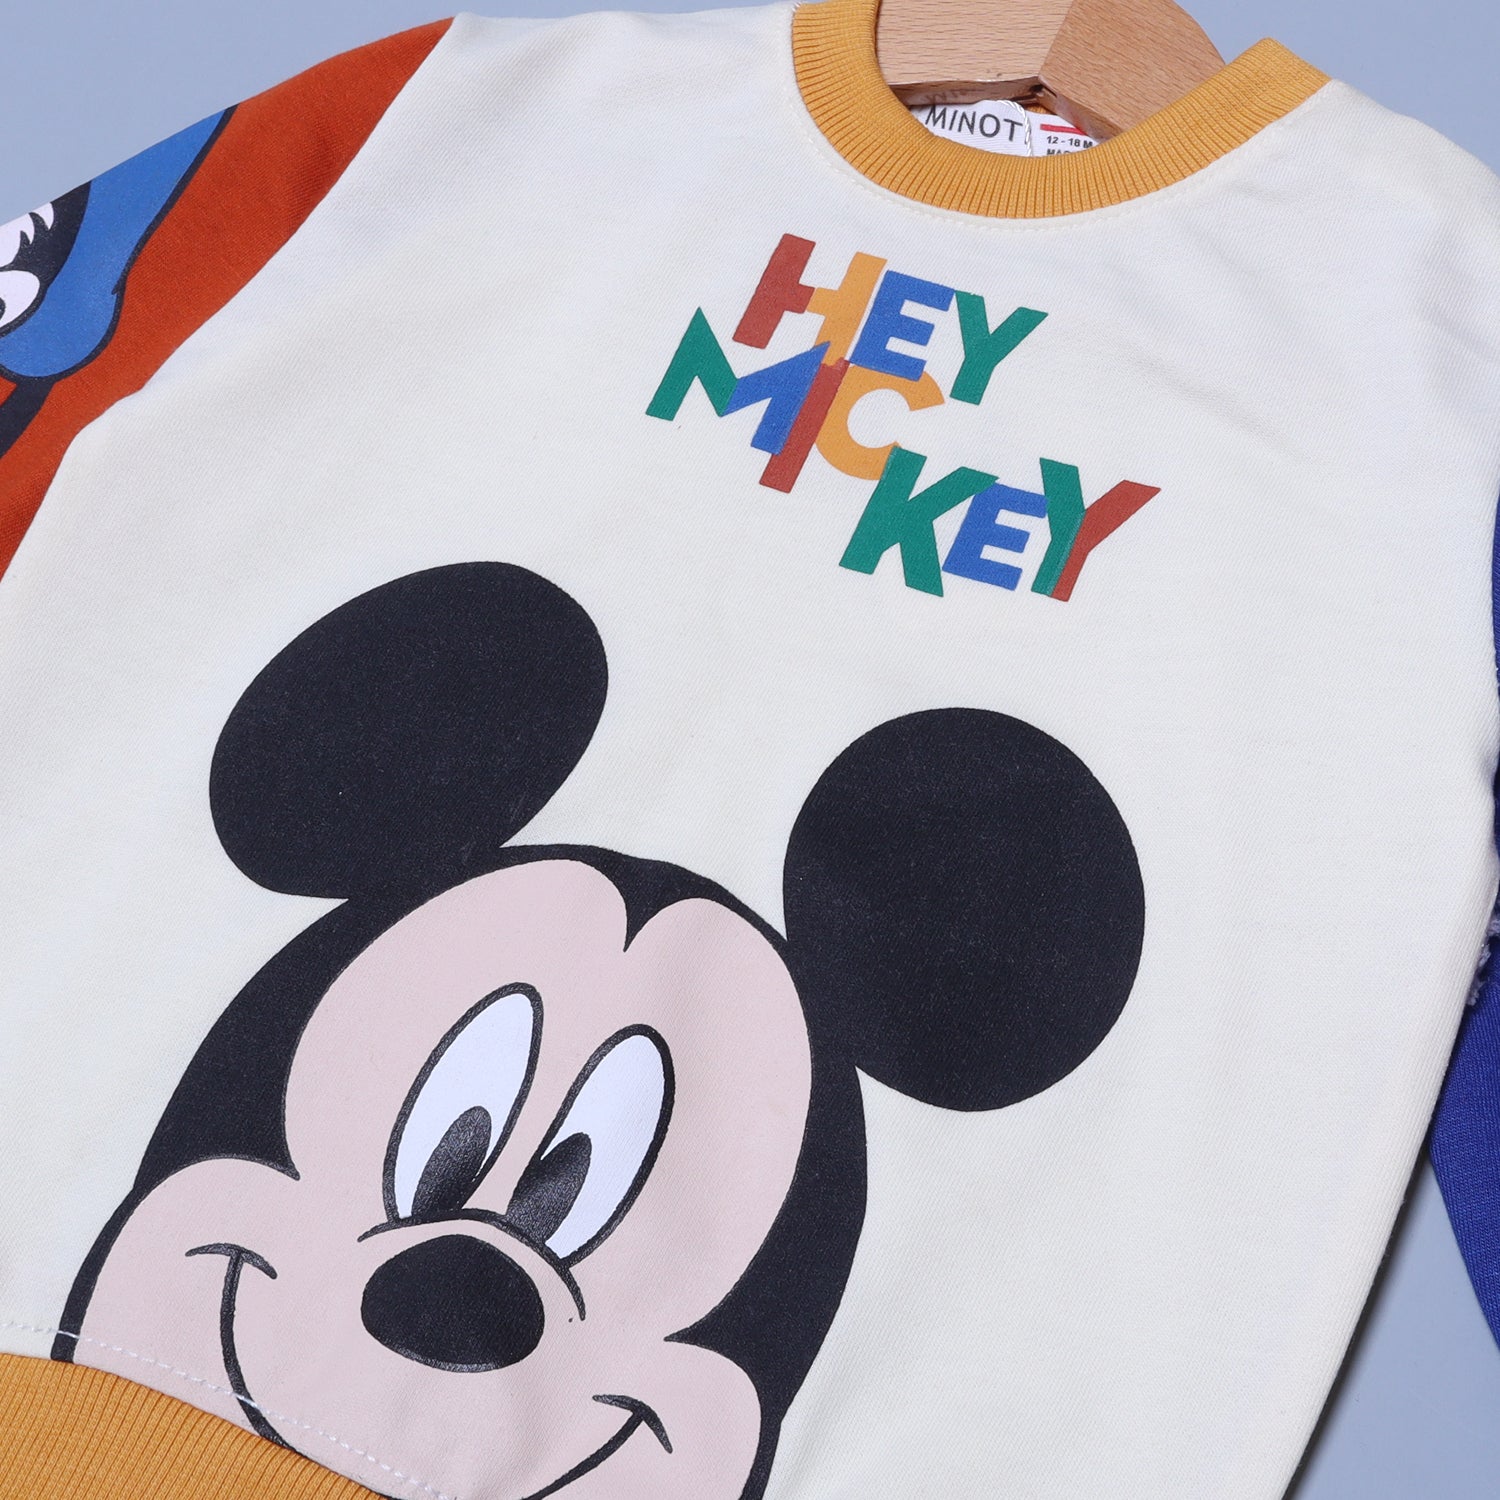 CREAM WITH BROWN & BLUE SLEEVES "HEY MICKEY" PRINTED TERRY FABRIC WINTER SUIT